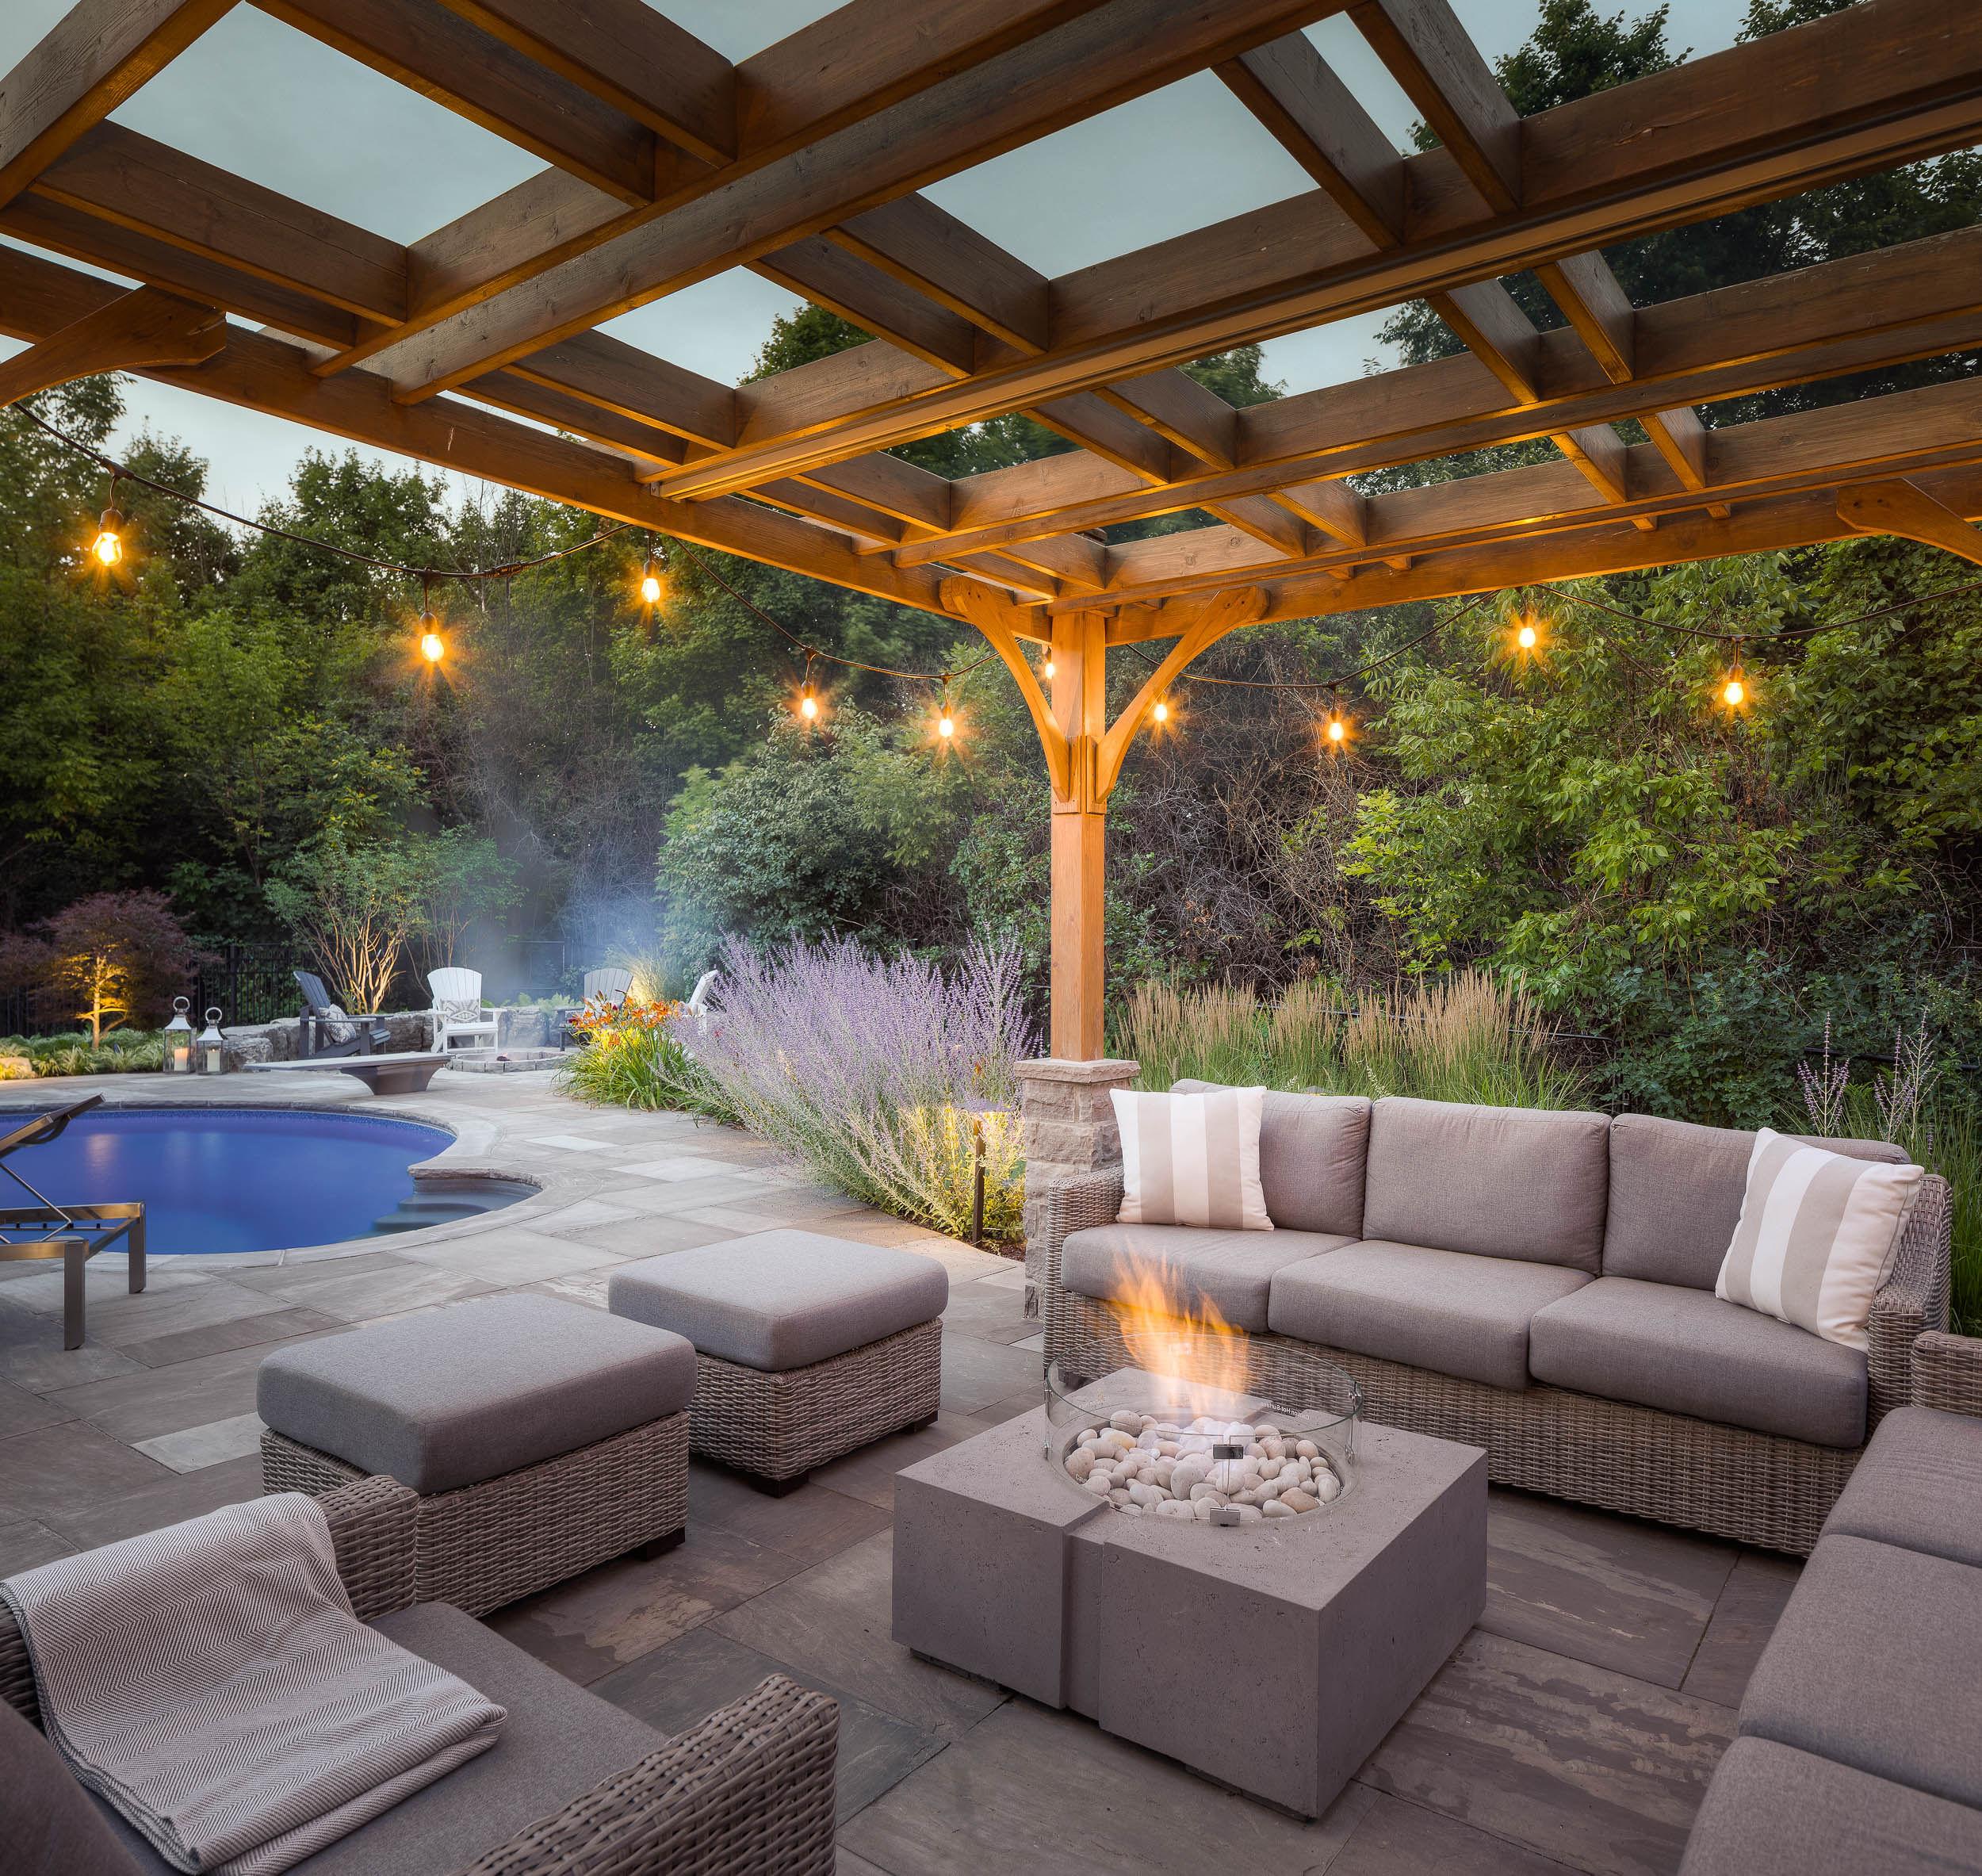 A square Dekko lightweight concrete fire pit surrounded by patio furniture under a pergola next to a pool and a lot of landscaping plants.